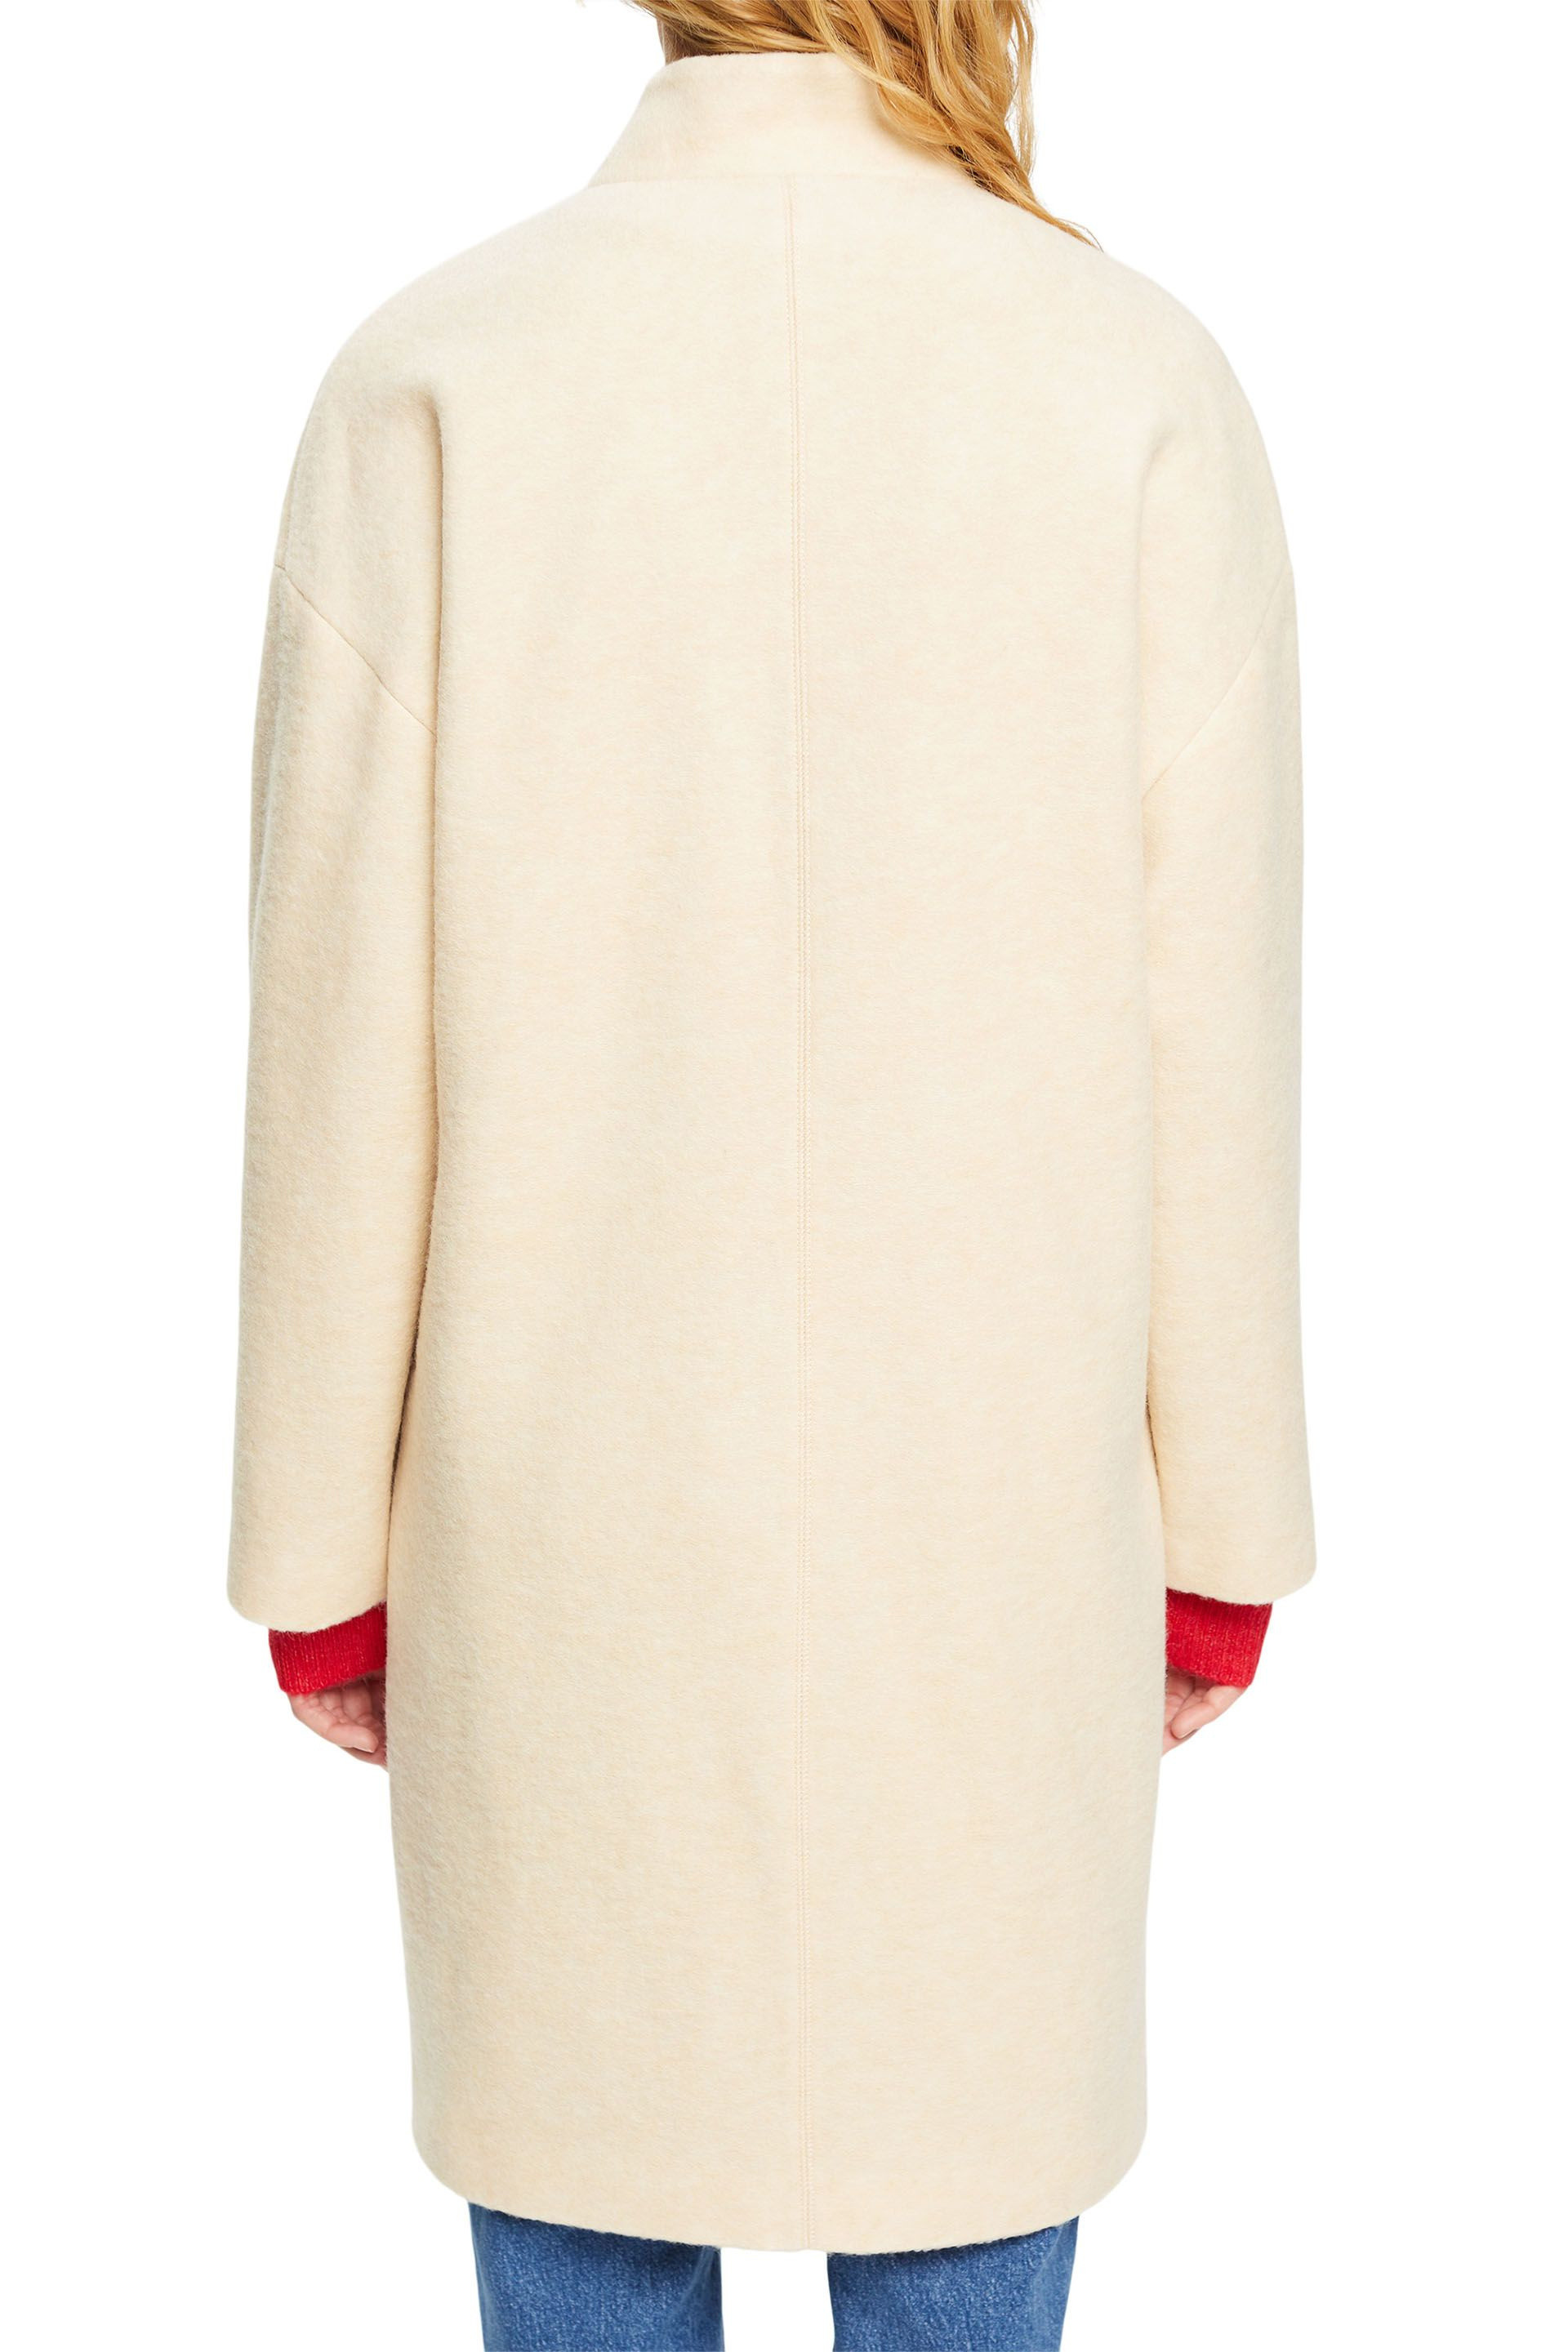 Wool blend coat with lapel collar, Beige, large image number 3